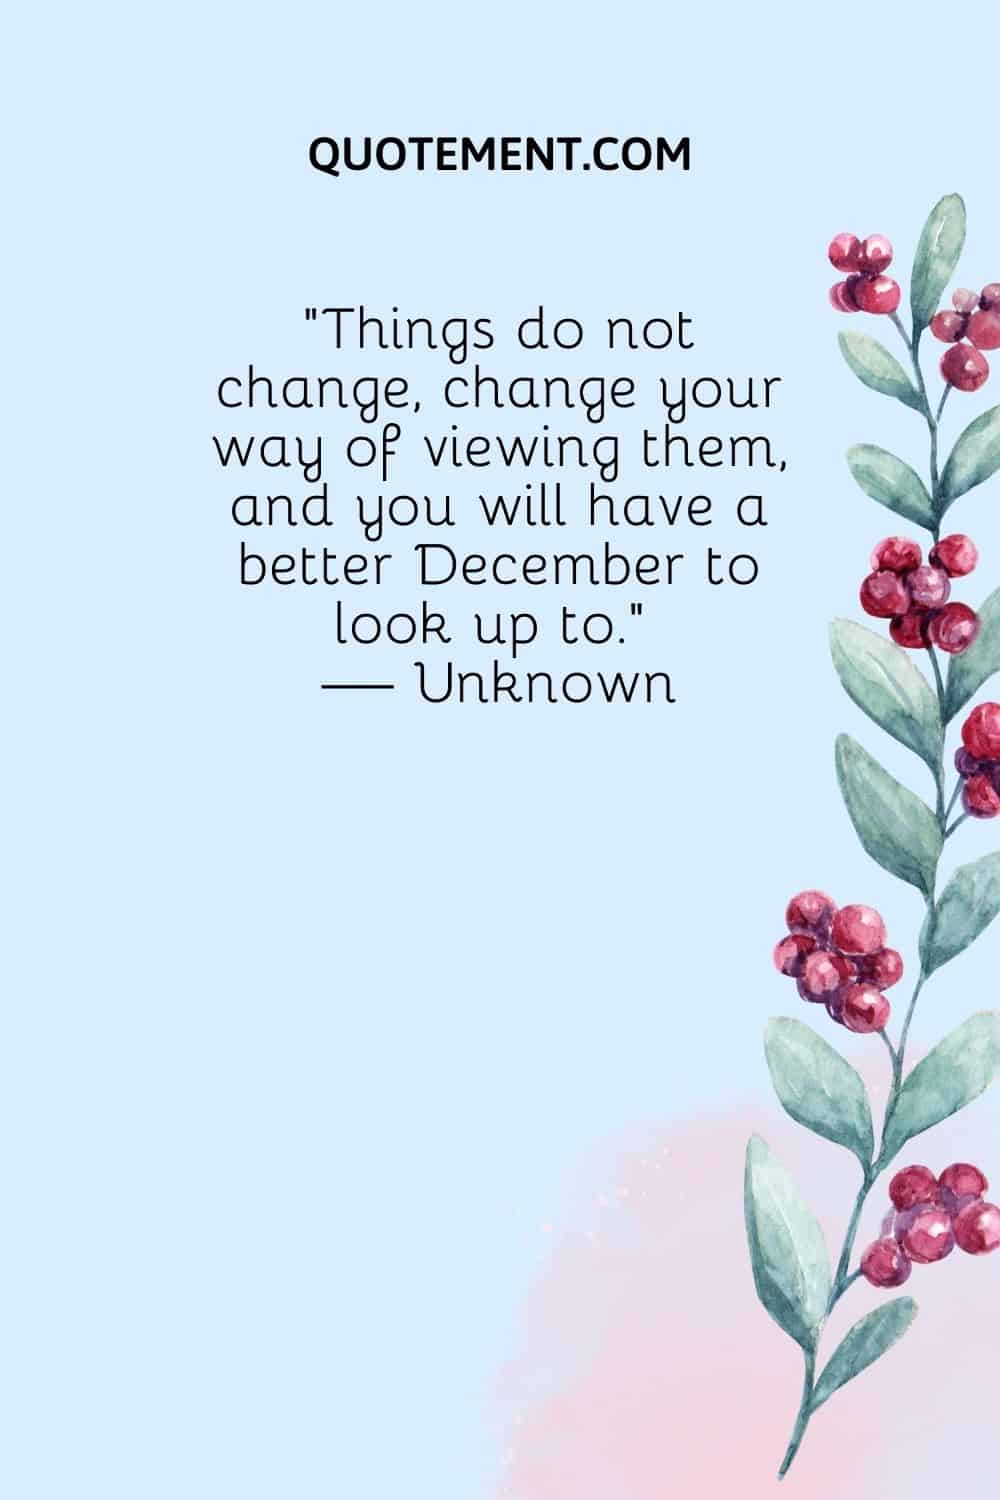 “Things do not change, change your way of viewing them, and you will have a better December to look up to.” — Unknown